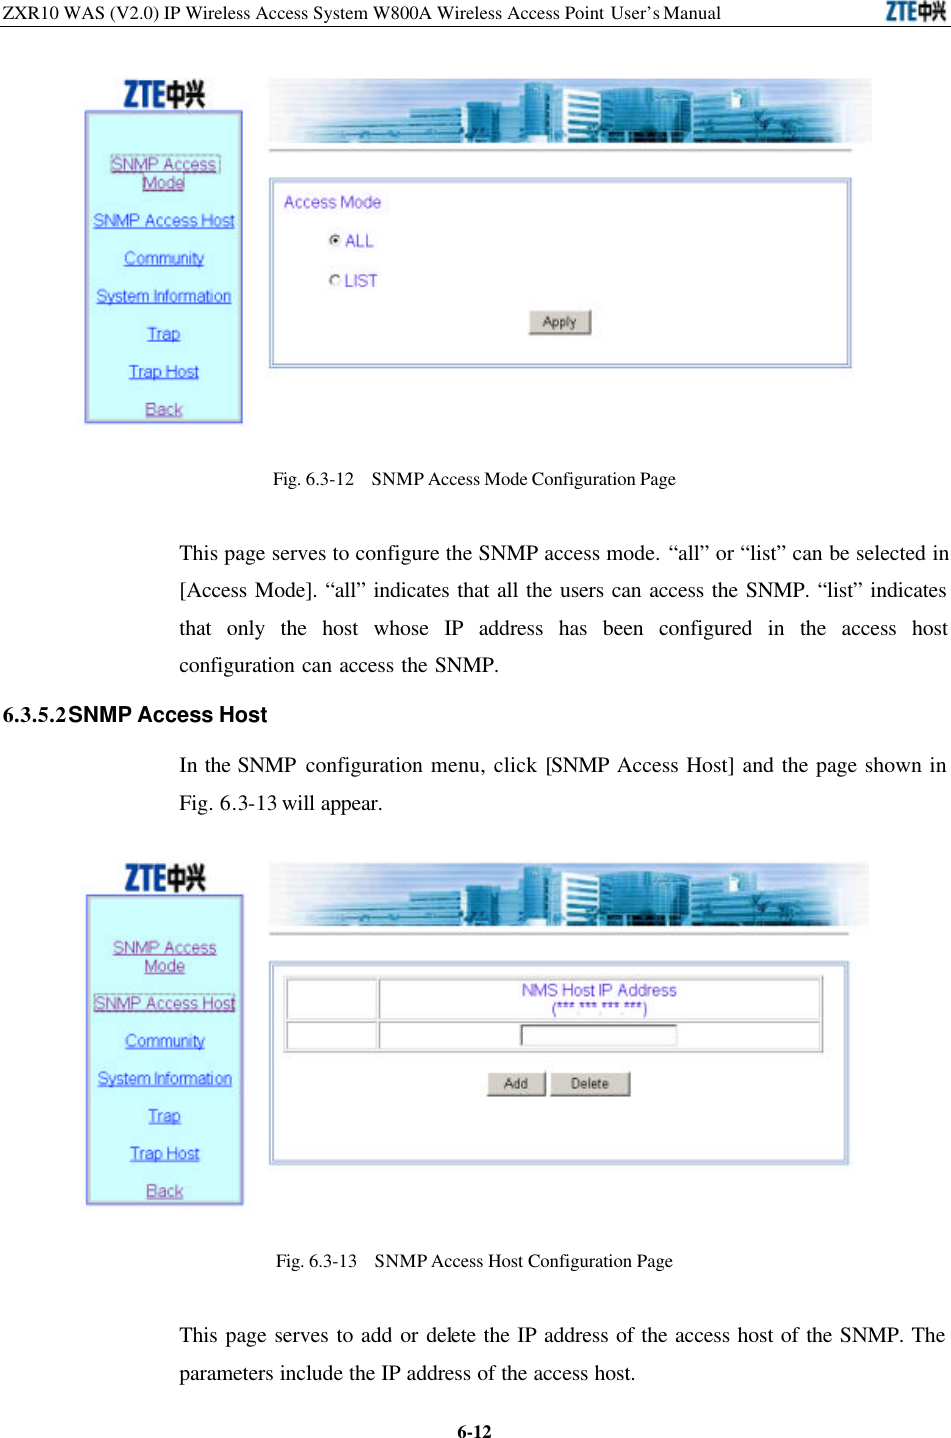 ZXR10 WAS (V2.0) IP Wireless Access System W800A Wireless Access Point User’s Manual  6-12 Fig. 6.3-12  SNMP Access Mode Configuration Page This page serves to configure the SNMP access mode. “all” or “list” can be selected in [Access Mode]. “all” indicates that all the users can access the SNMP. “list” indicates that only the host whose IP address has been configured in the access host configuration can access the SNMP.   6.3.5.2 SNMP Access Host   In the SNMP configuration menu, click [SNMP Access Host] and the page shown in Fig. 6.3-13 will appear.    Fig. 6.3-13  SNMP Access Host Configuration Page   This page serves to add or delete the IP address of the access host of the SNMP. The parameters include the IP address of the access host.   